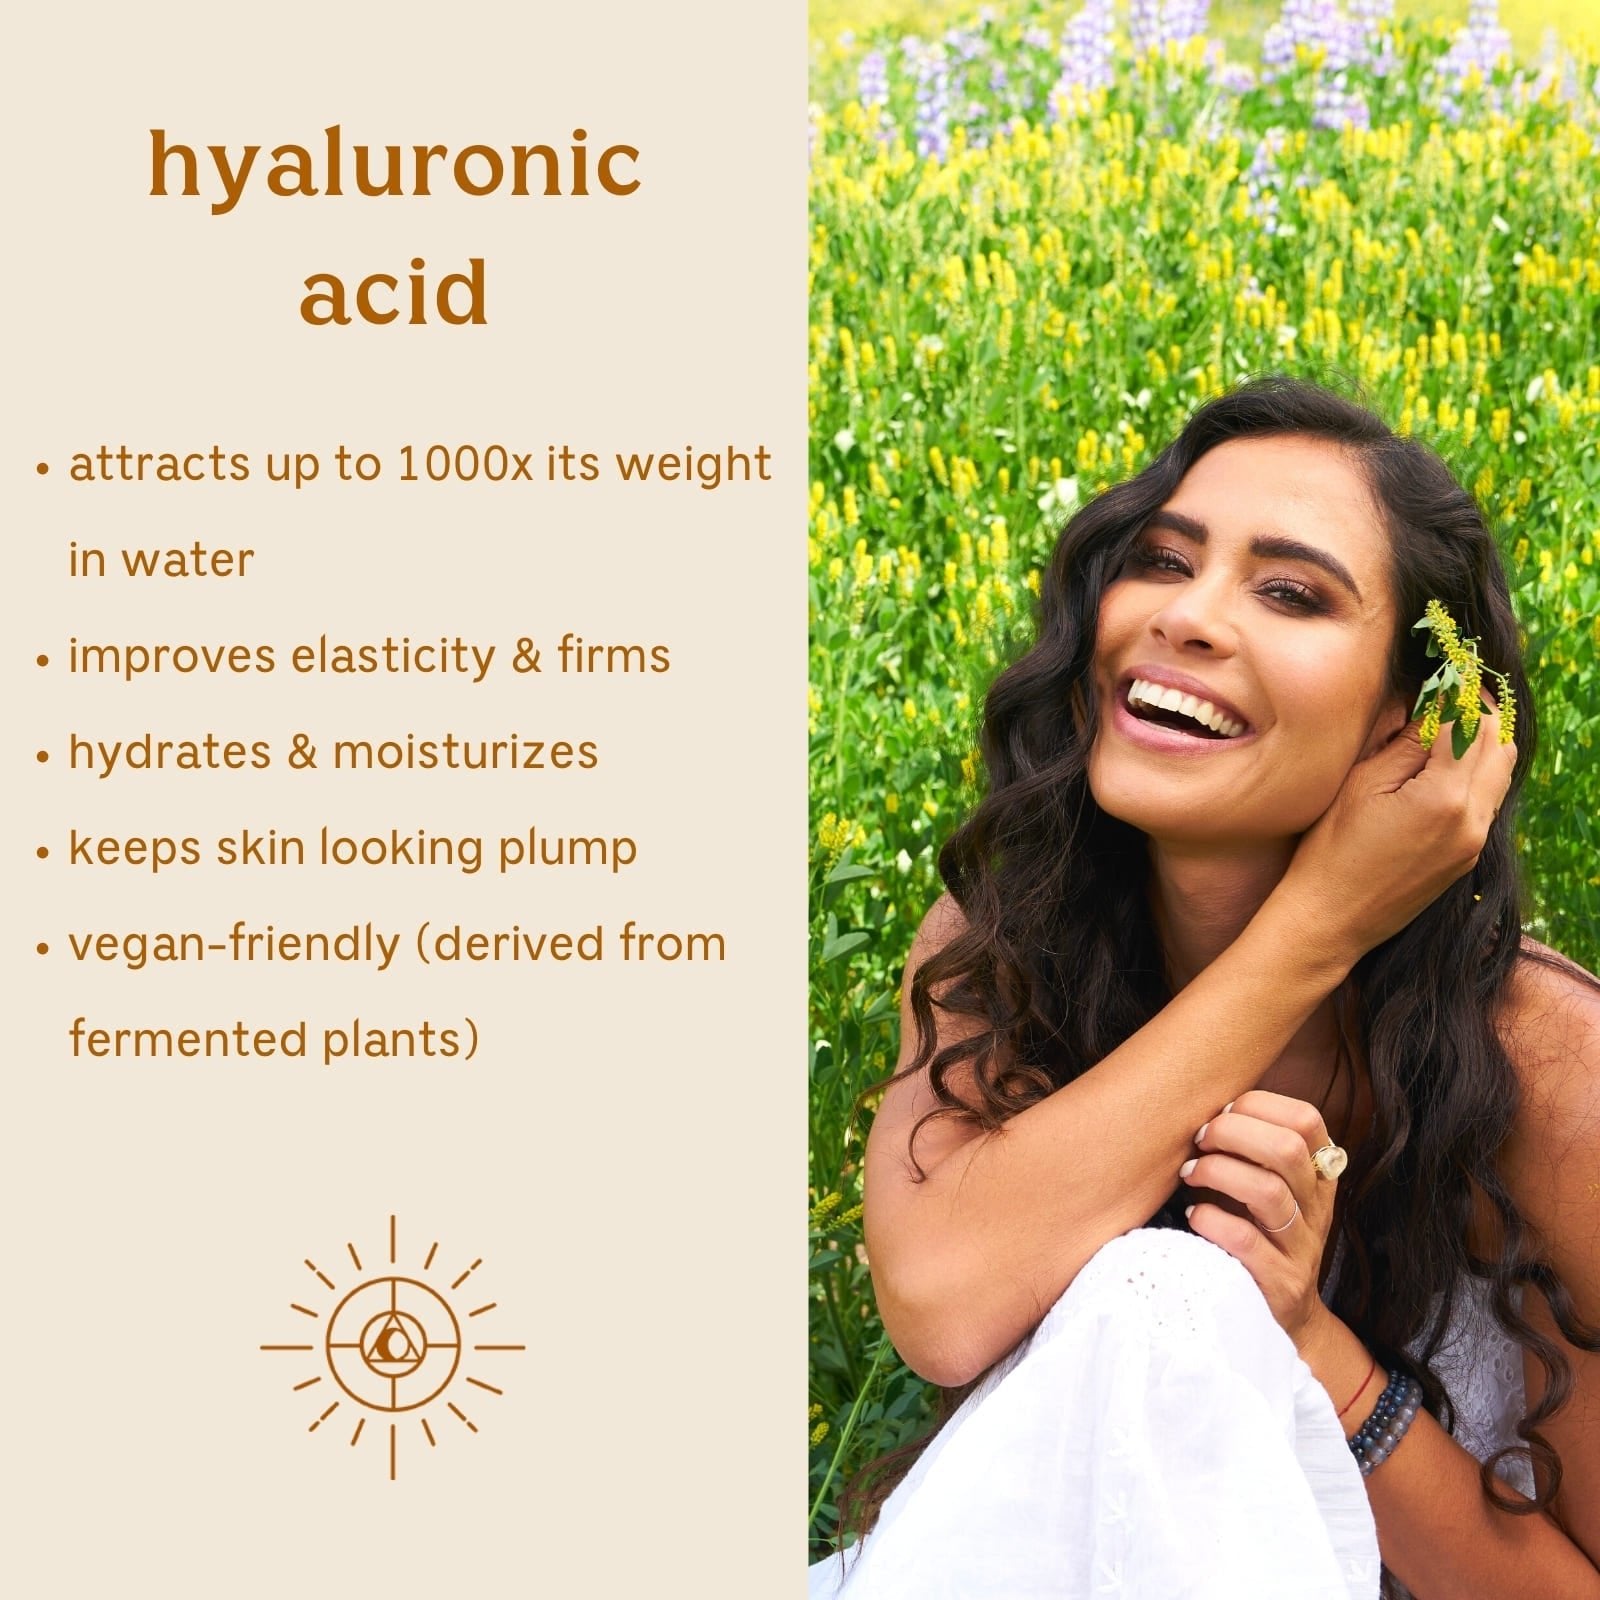 Solluna's Feel Good Asc2P Vitamin C Serum Key Ingredient Benefit Description. Hyaluronic Acid: Attracts up to 1000x its weight in water, Improves elasticity & firms, Hydrates & moisturizes, Keeps skin looking plump, Vegan-friendly (derived from fermented plants)